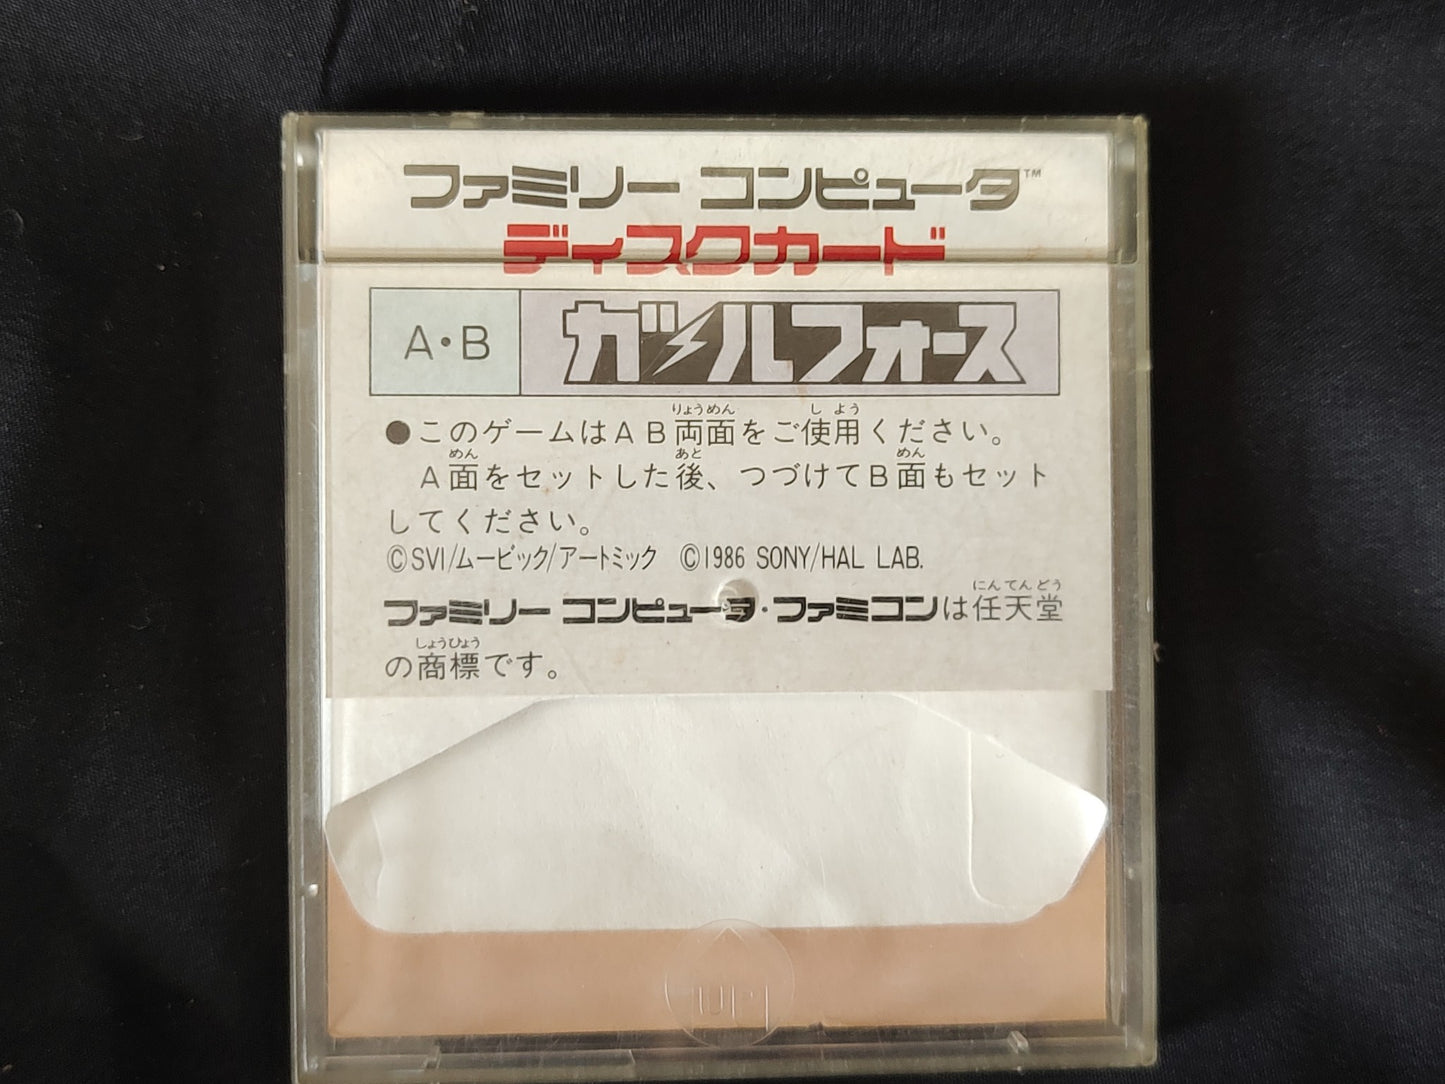 GALL FORCE FAMICOM (NES) Disk System, Game disk and box set, working-g0119-